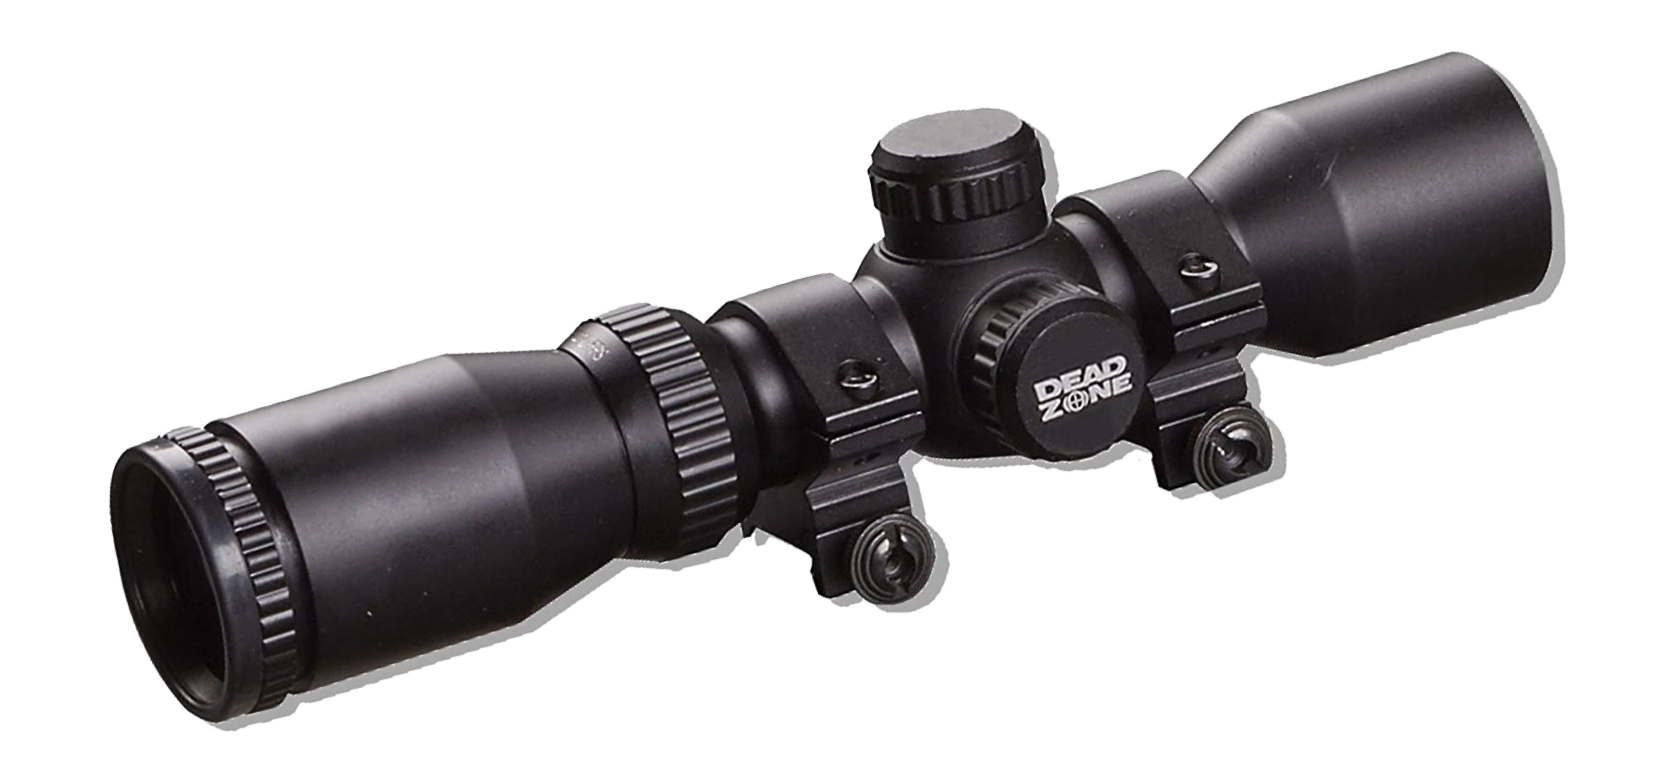 Excalibur ultra-compact dead-zone crossbow scope